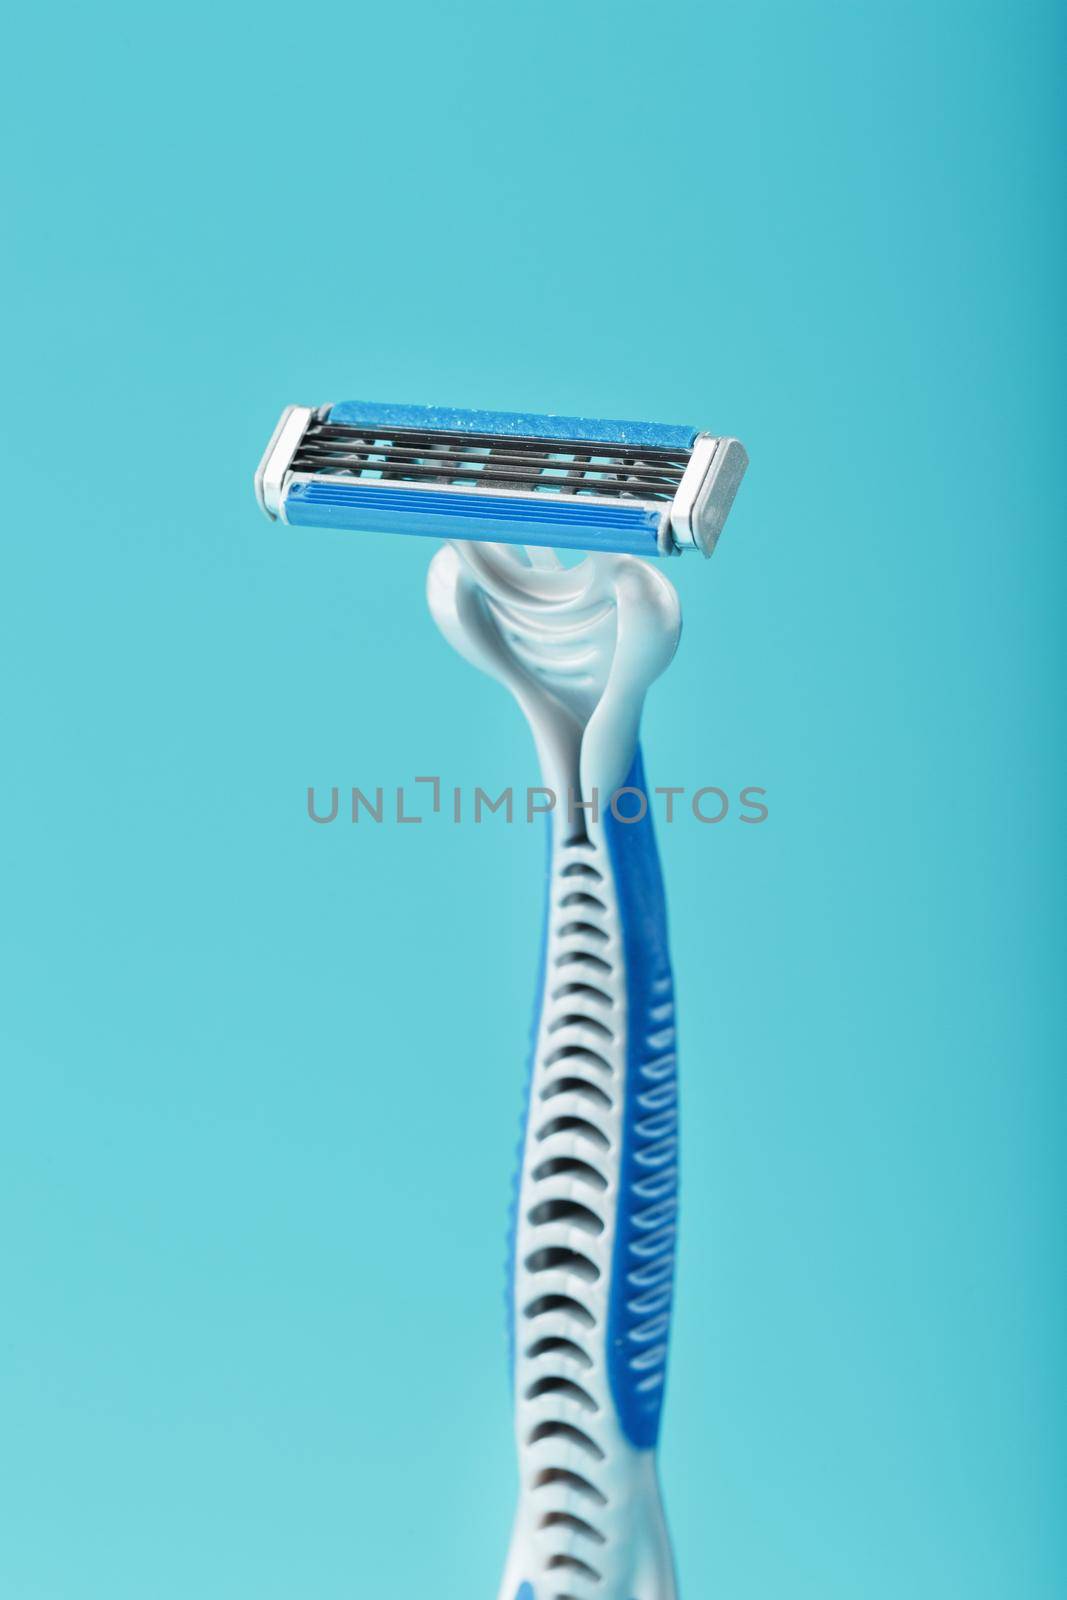 Blades of a new shaving machine on a blue background by AlexGrec